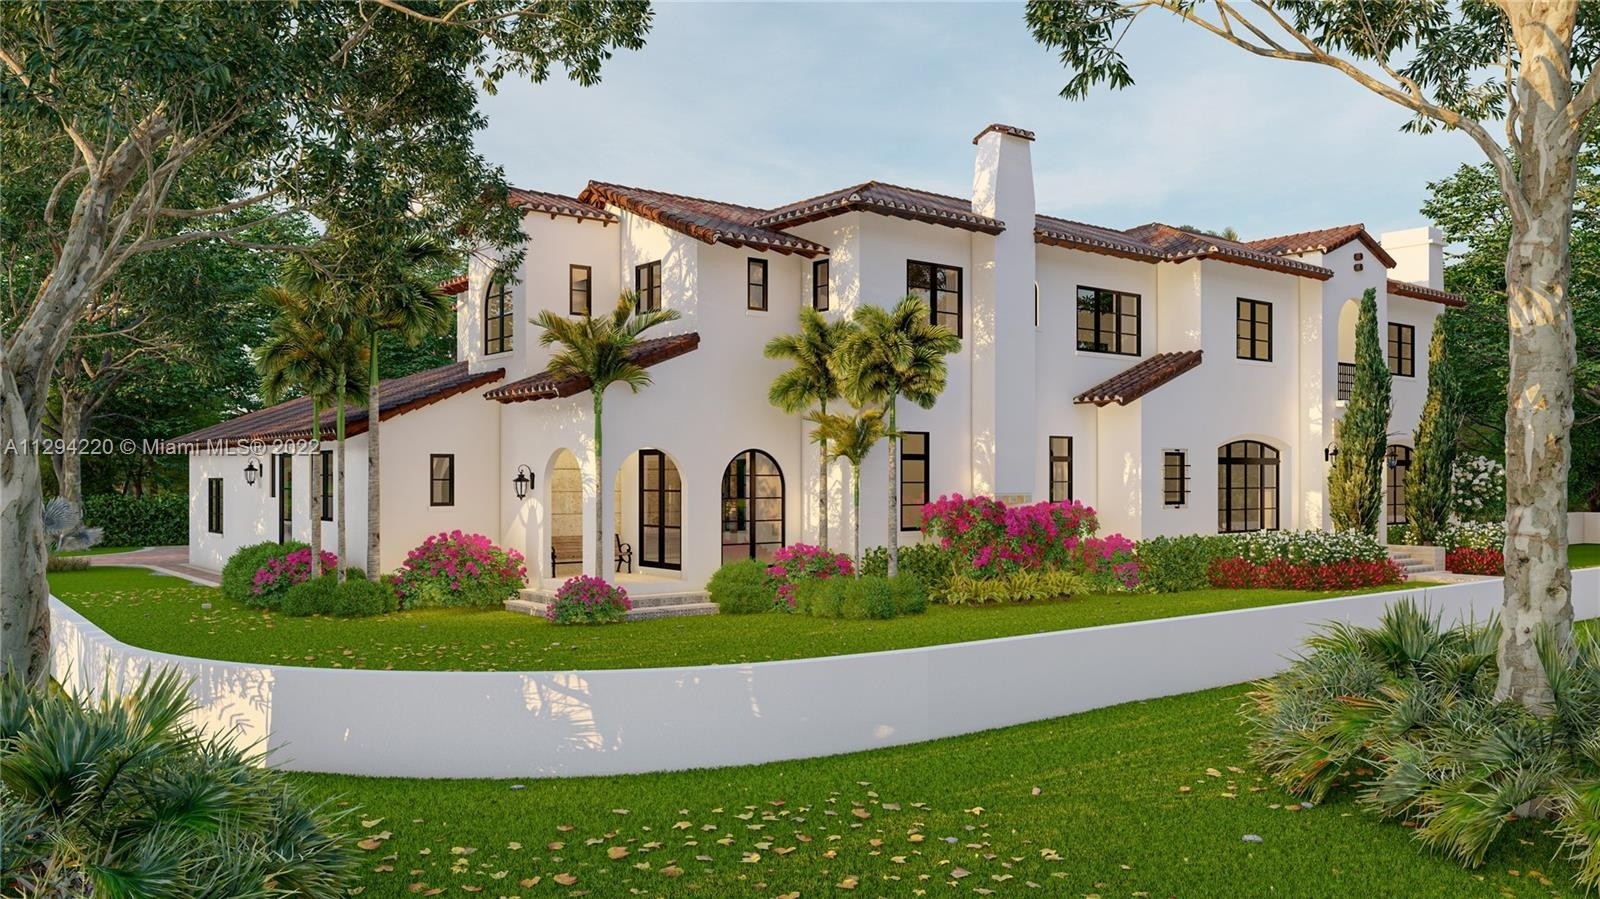 1. Single Family Homes for Sale at Riviera, Coral Gables, FL 33146